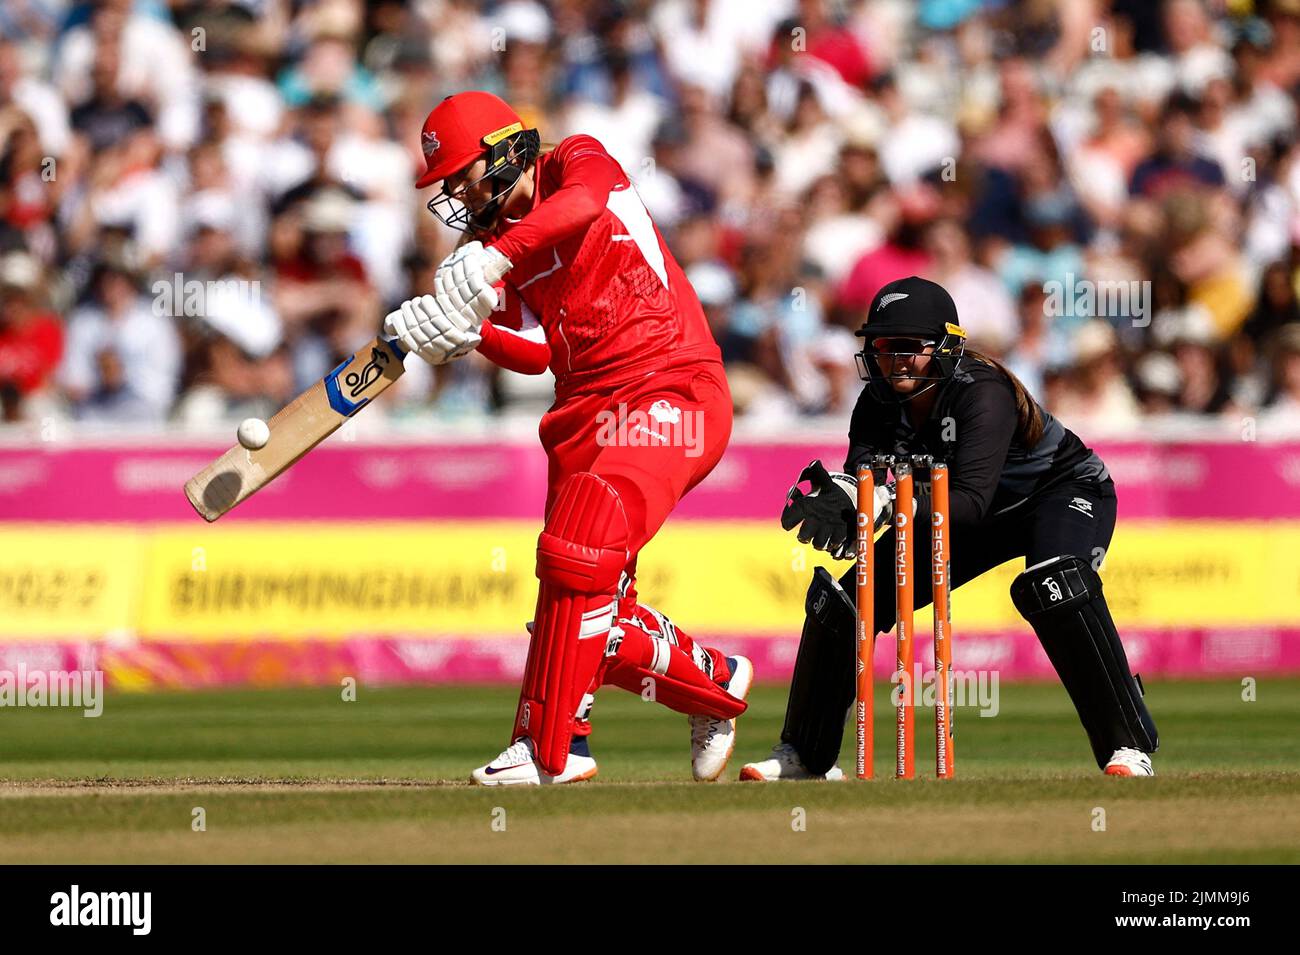 Commonwealth Games - Women's Cricket T20 - England v New Zealand - Bronze Medal - Edgbaston Stadium, Britain - August 7, 2022 England's Sophie Ecclestone hits a four of the bowling off New Zealand's Brooke Halliday REUTERS/Jason Cairnduff Stock Photo